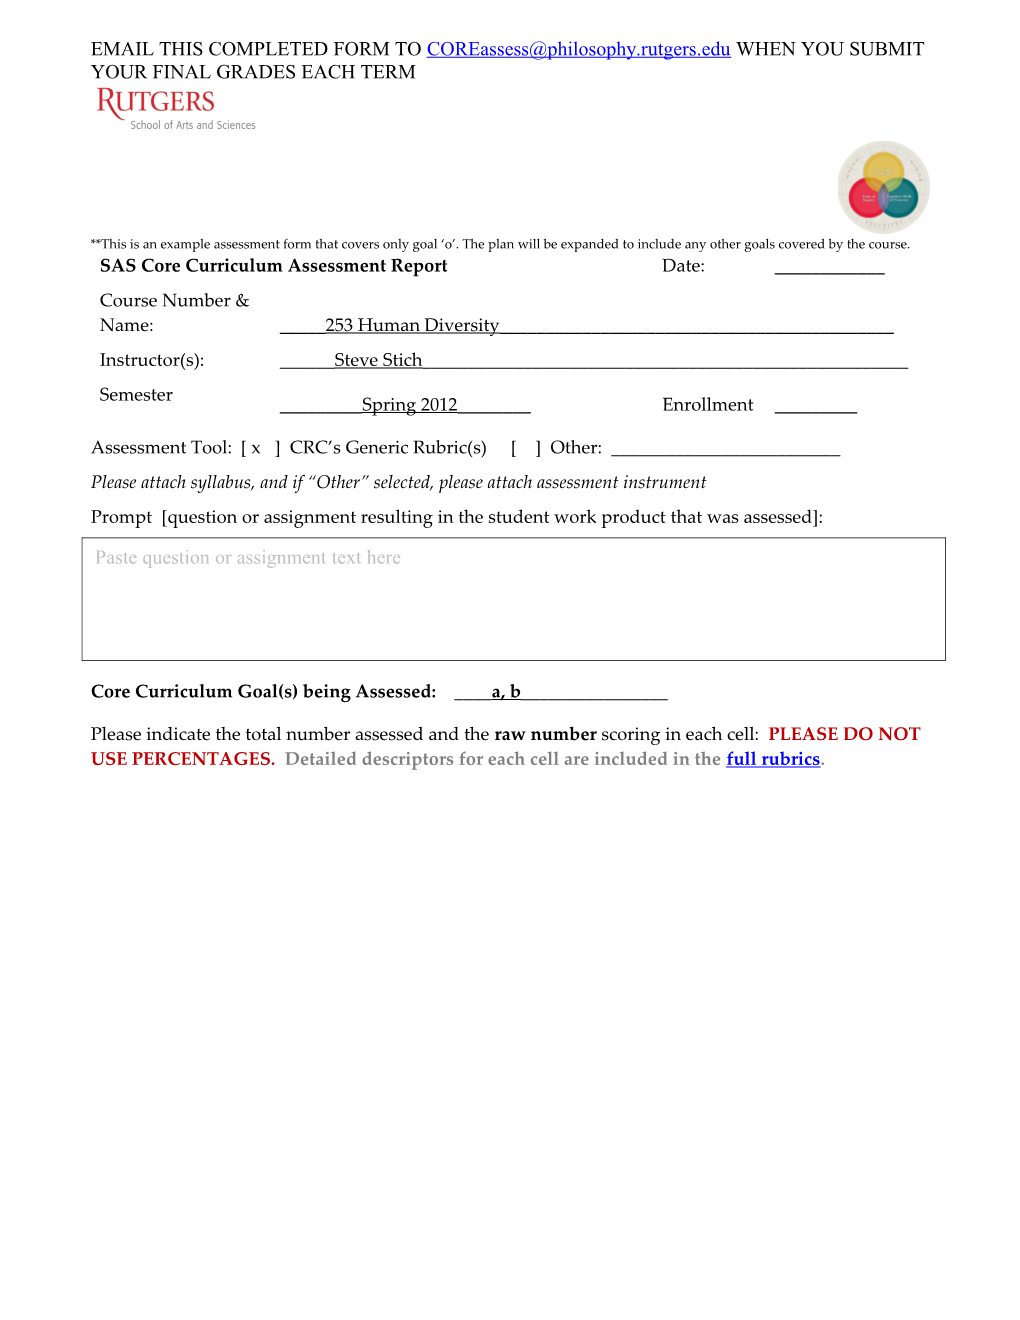 Email This Completed Form to When You Submit Your Final Grades Each Term